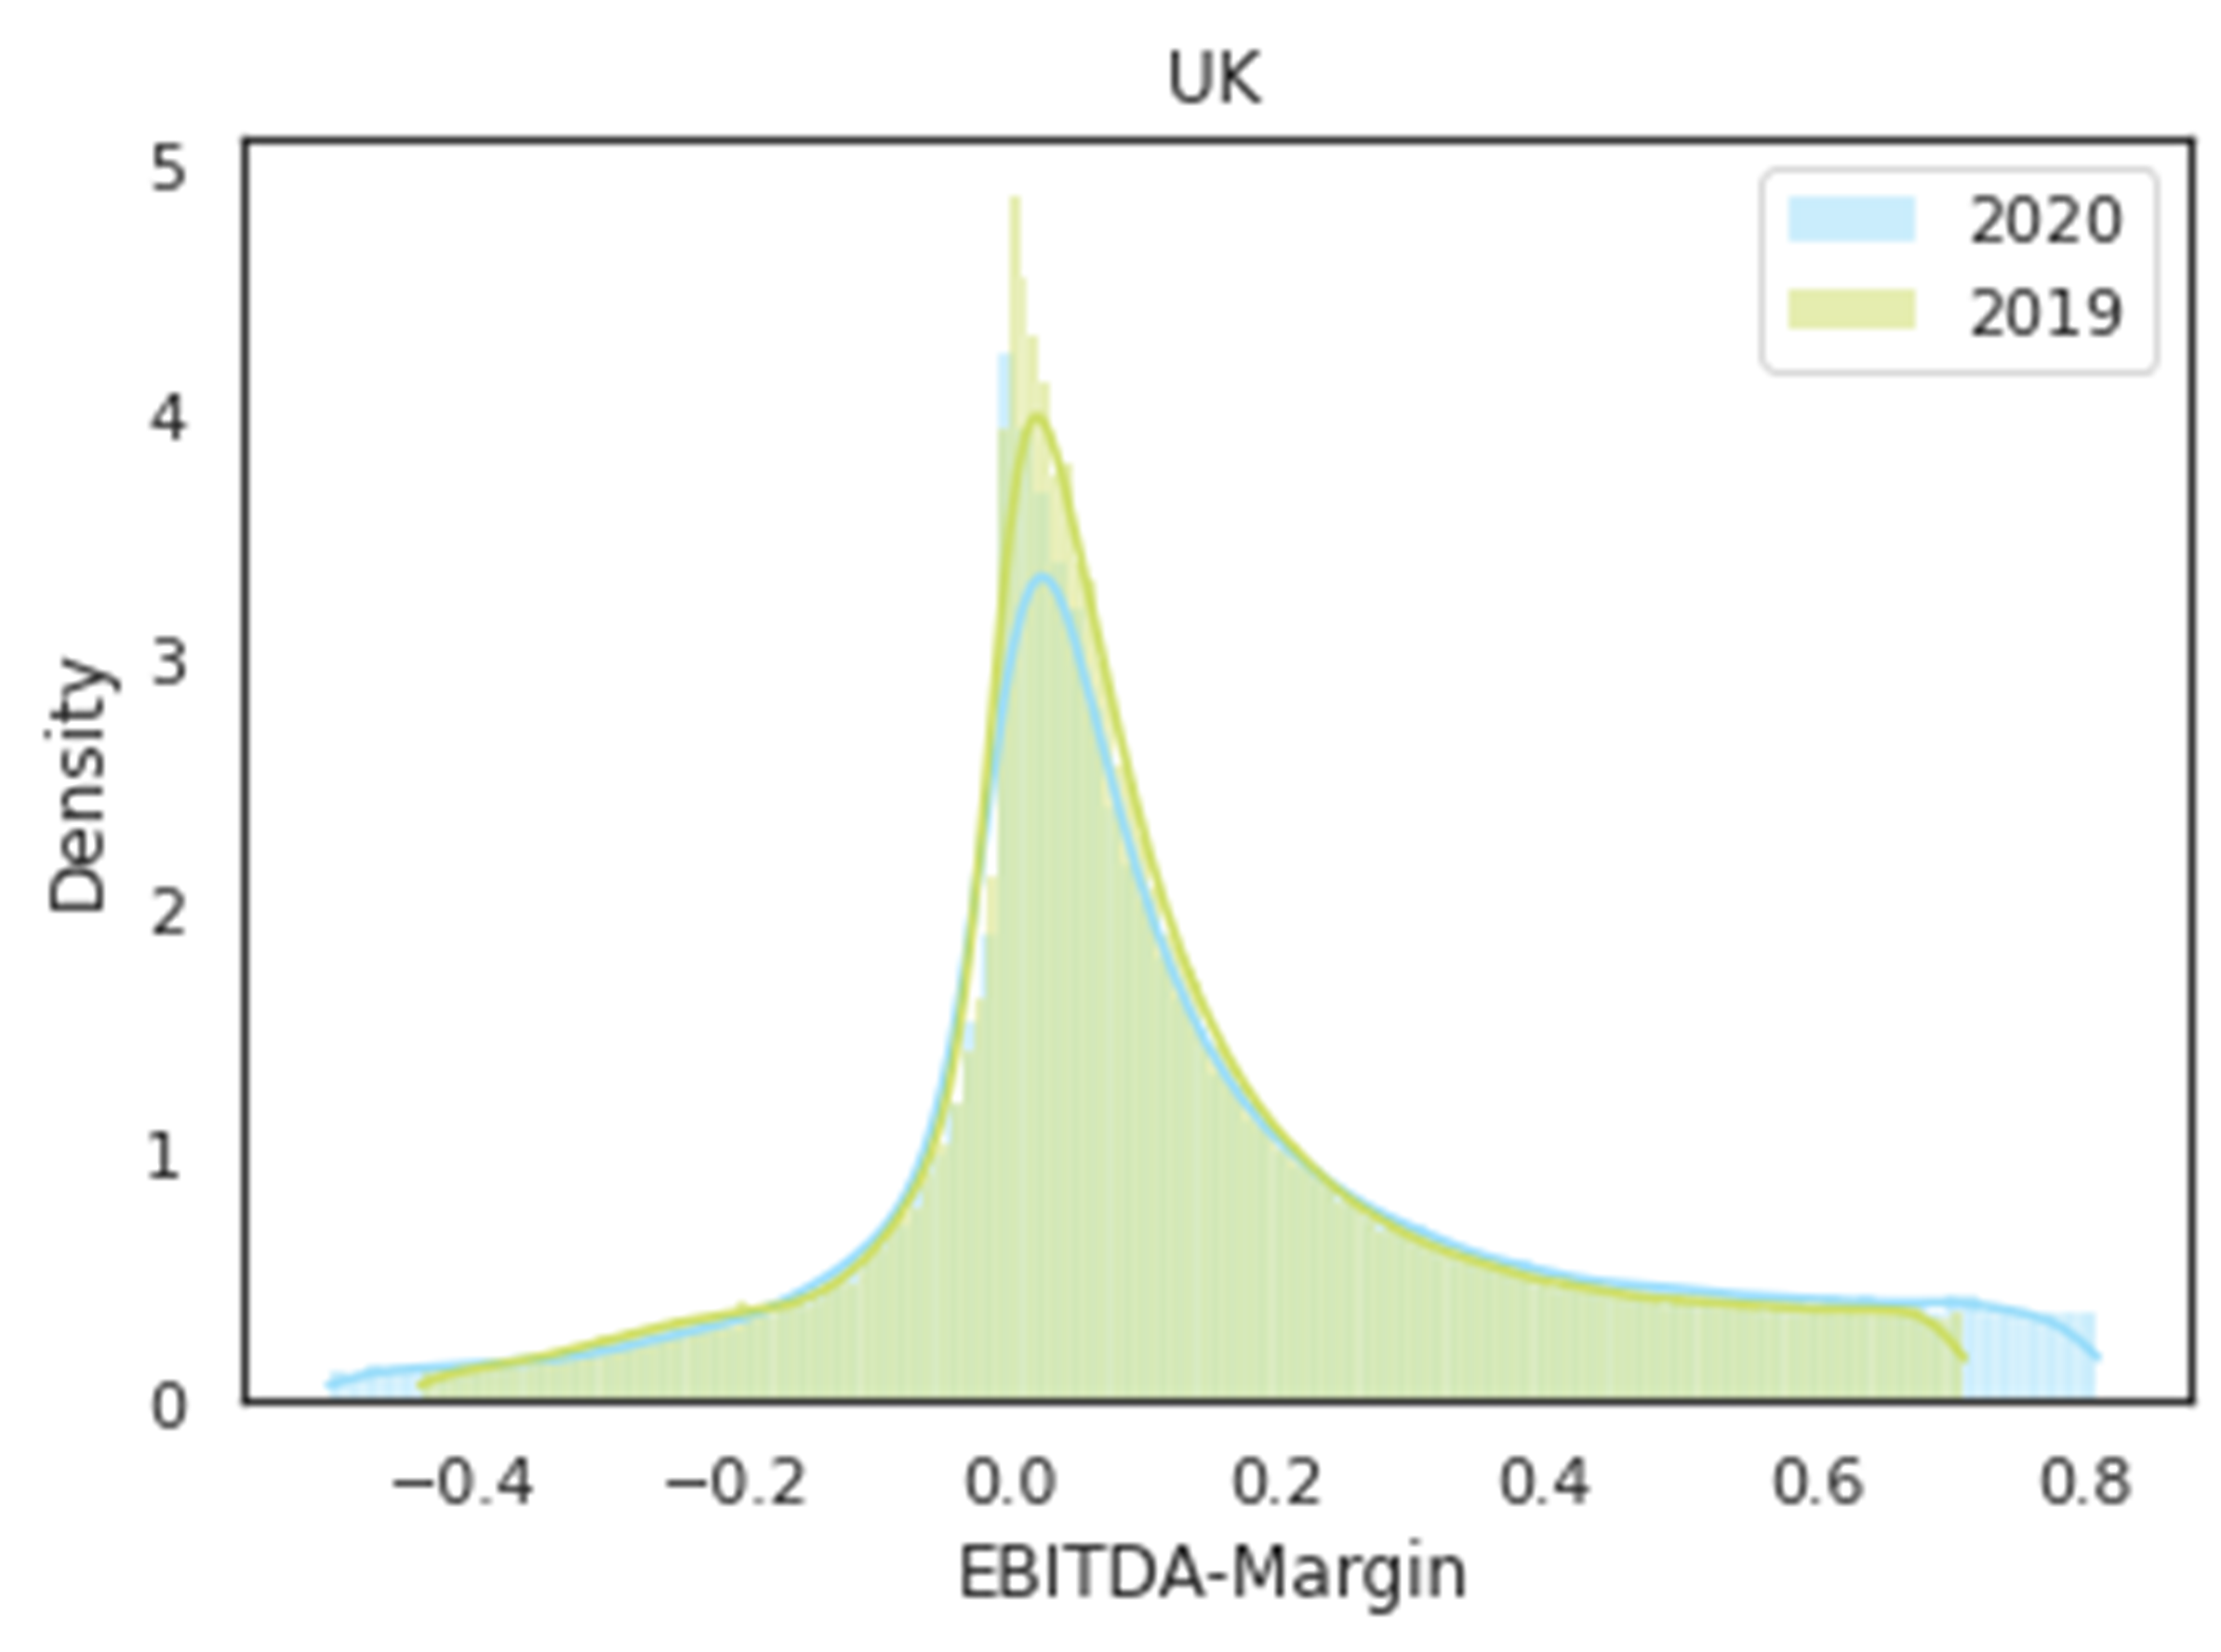 Figure 10 – EBITDA-margin distribution for SMEs in the UK in 2019 and 2020